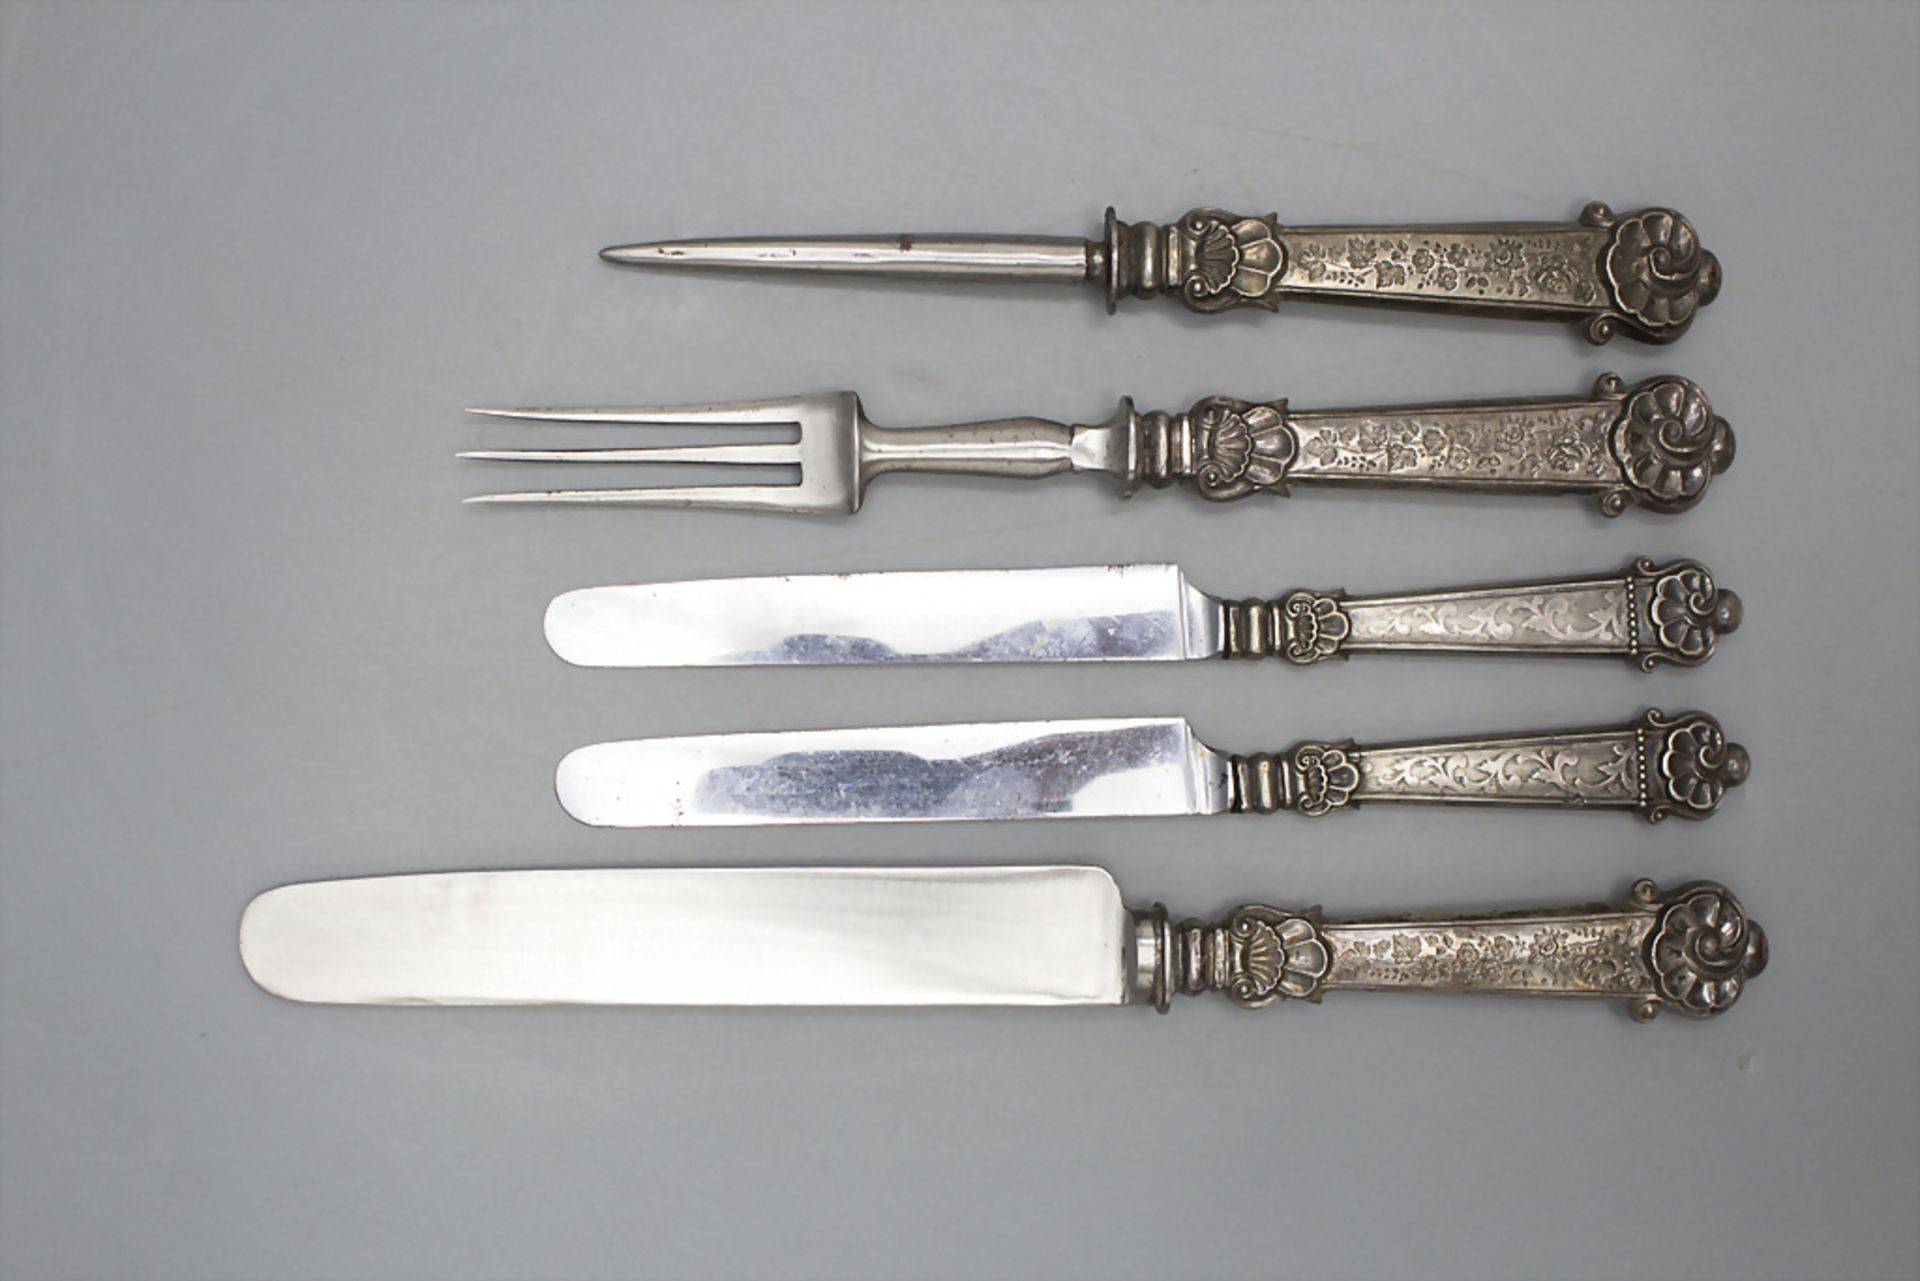 5 Teile Barock Besteck / 5 pieces of Baroque cutlery, Ende 18. oder Anfang 19. Jh. - Image 2 of 3